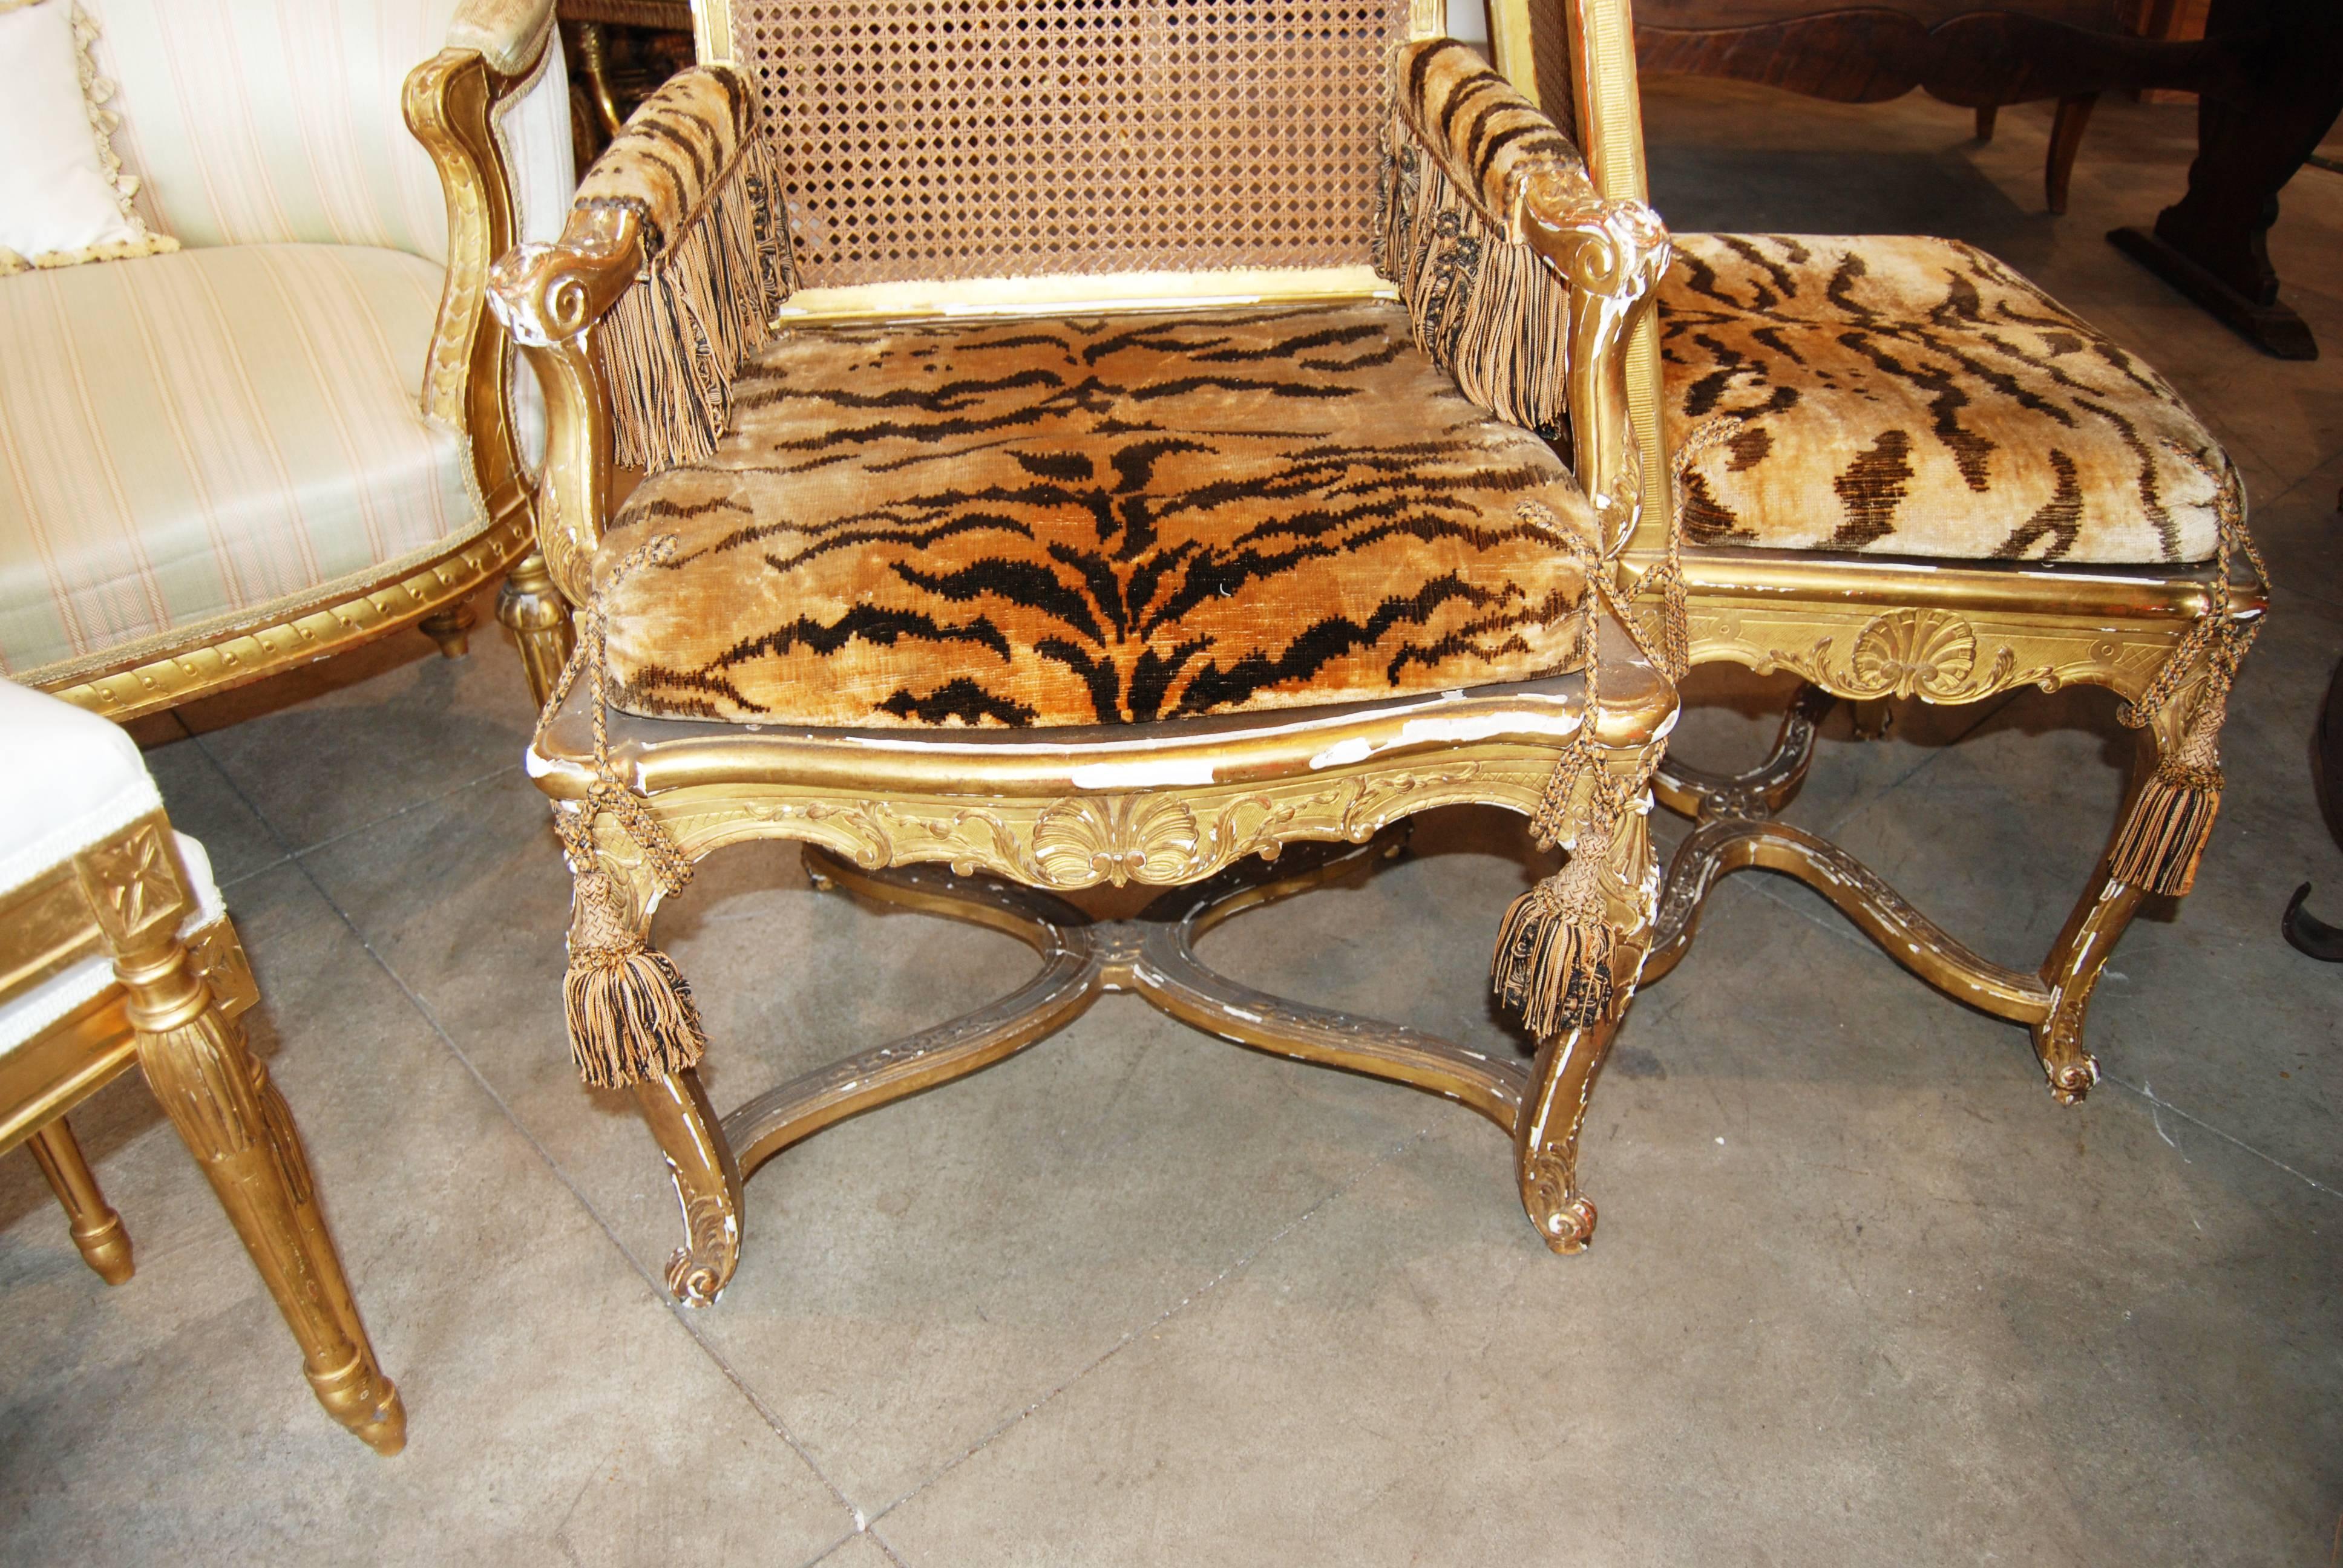 Set of 12 giltwood chairs comprised of six armchairs and six side chairs.